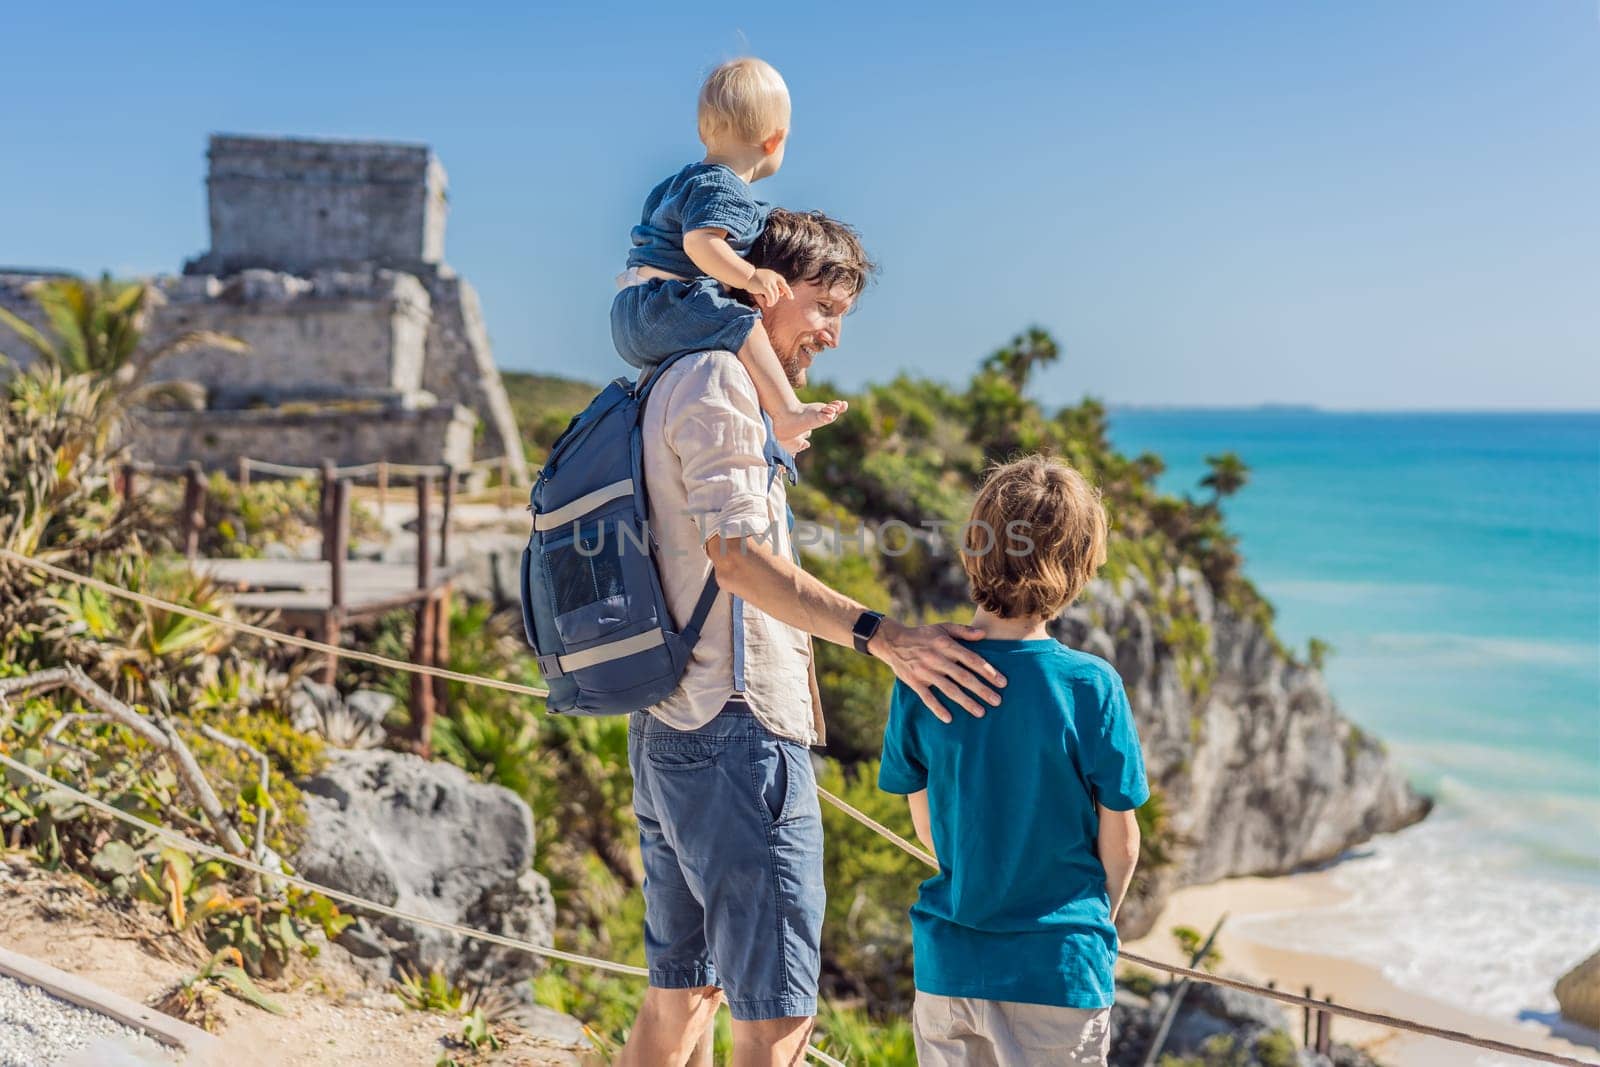 Father and two sons tourists enjoying the view Pre-Columbian Mayan walled city of Tulum, Quintana Roo, Mexico, North America, Tulum, Mexico. El Castillo - castle the Mayan city of Tulum main temple by galitskaya